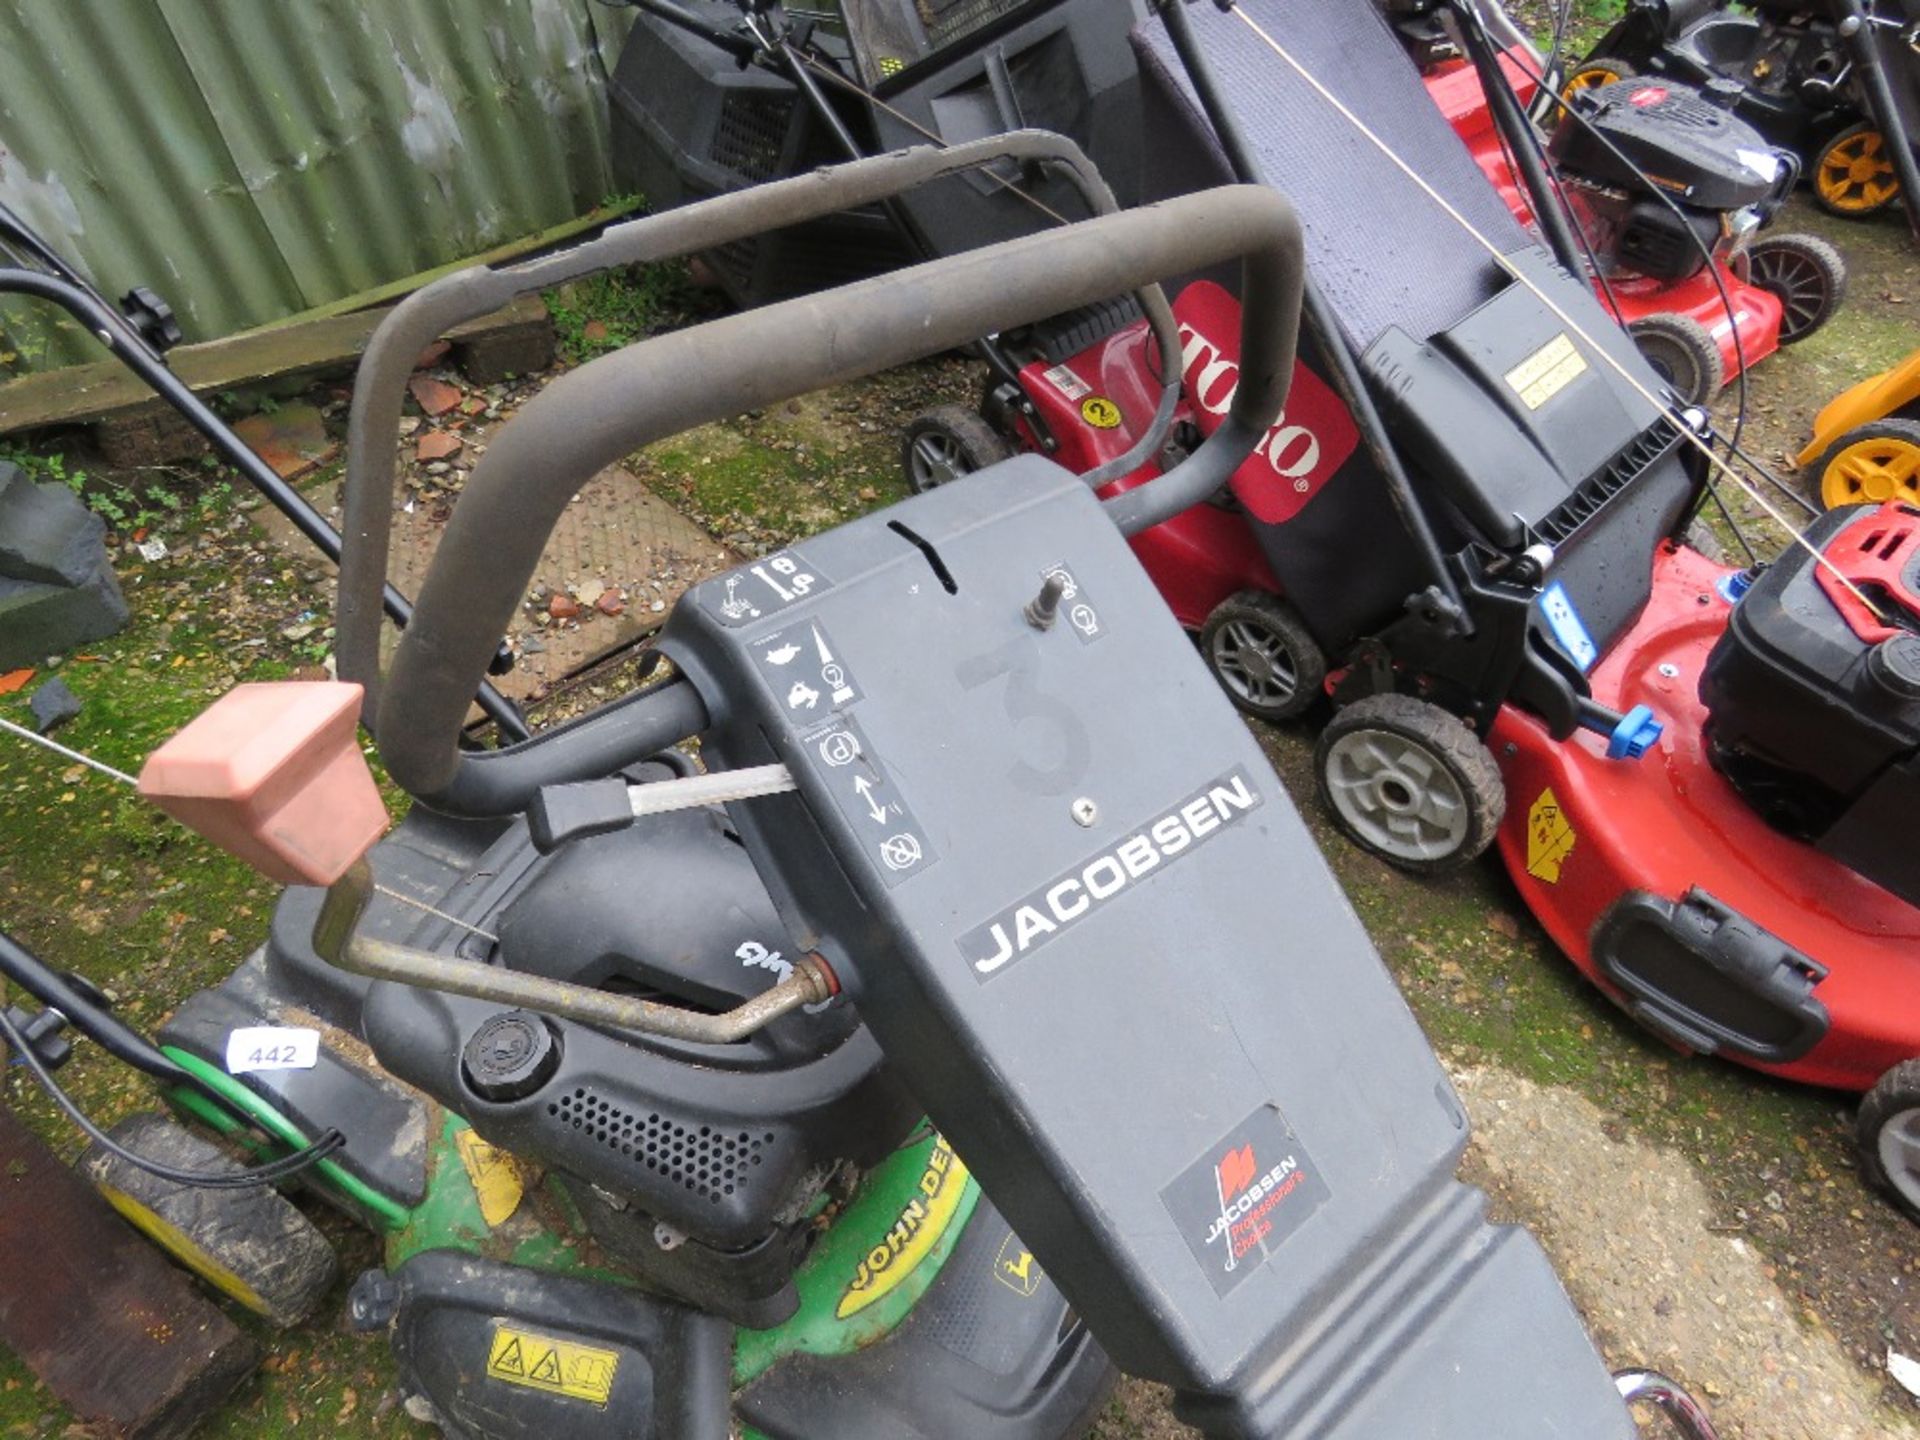 JACOBSEN PETROL ENGINED GREEN KING 522 CYLINDER LAWN MOWERN HONDA ENGINE, NO BOX. THIS LOT IS SOL - Image 6 of 6